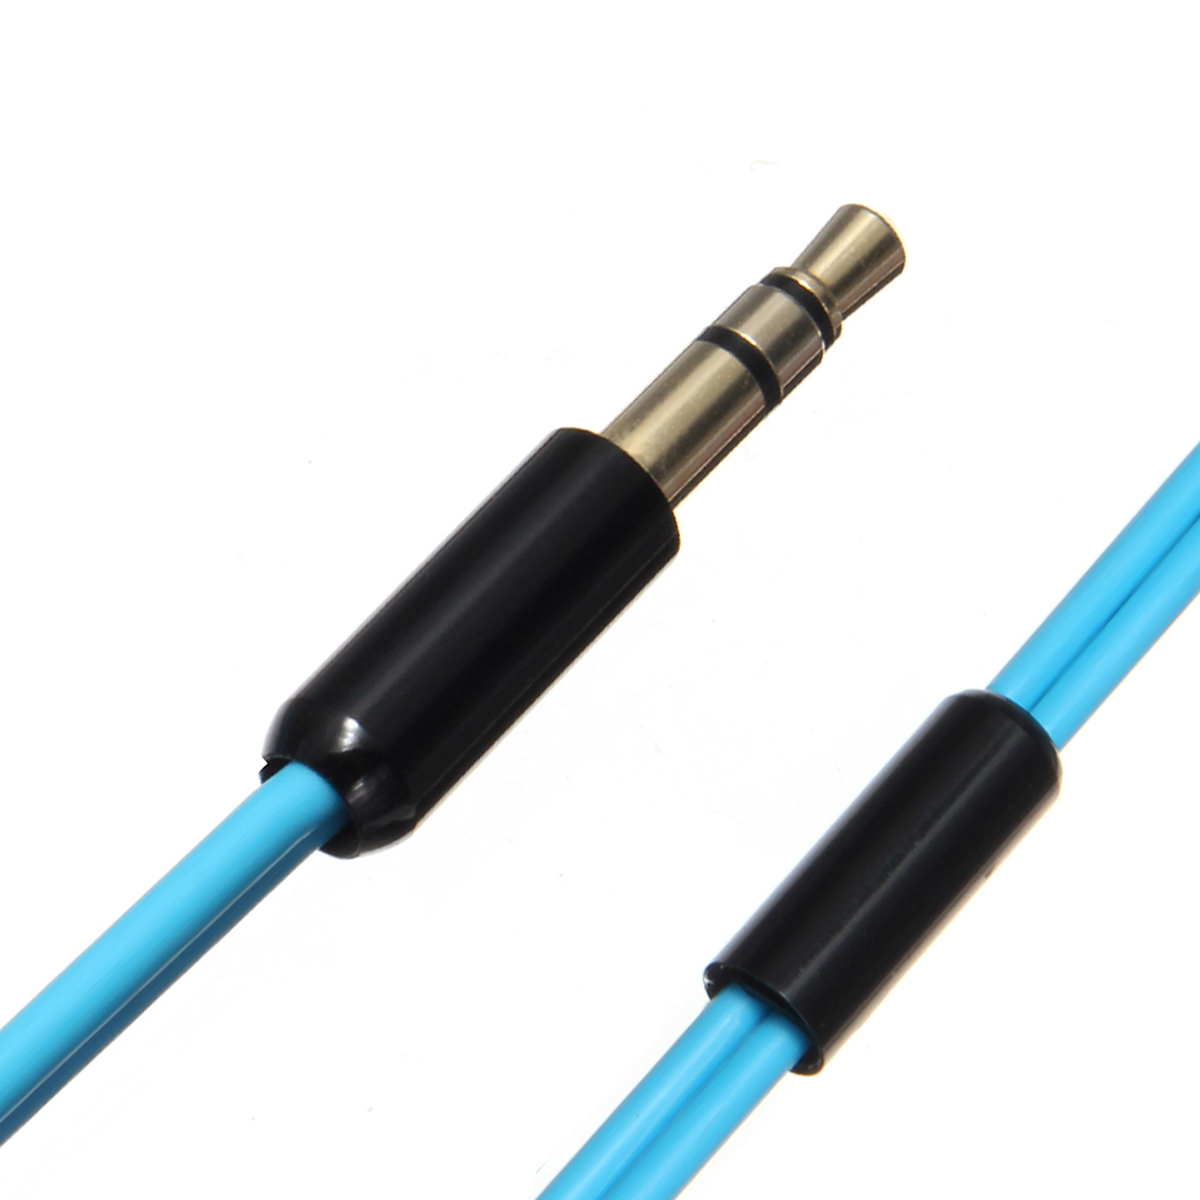 12M-35mm-Audio-Upgrade-Headphone-Cable-Blue-For-B-amp-W-Bowers-amp-Wilkins-P3-1147435